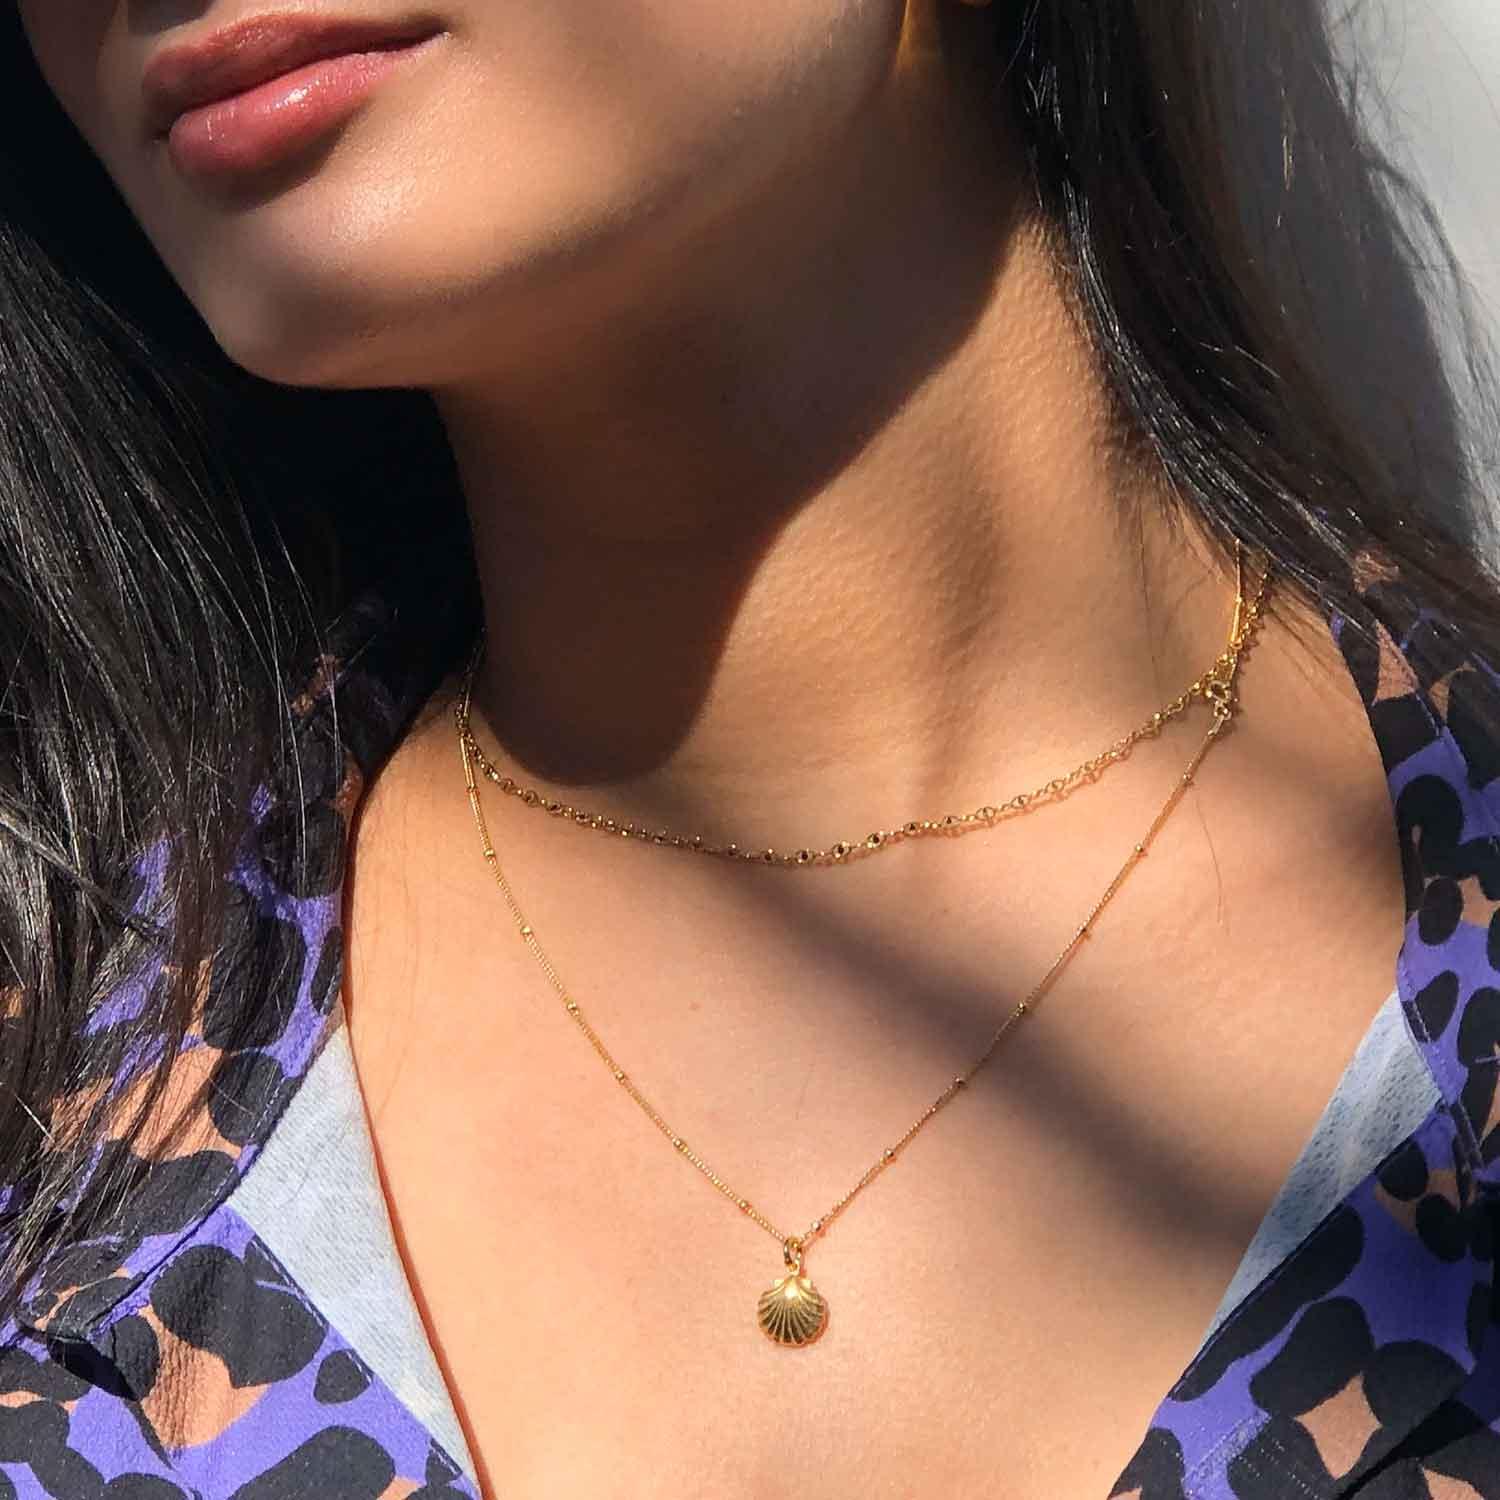 model with sea shell pendant necklace